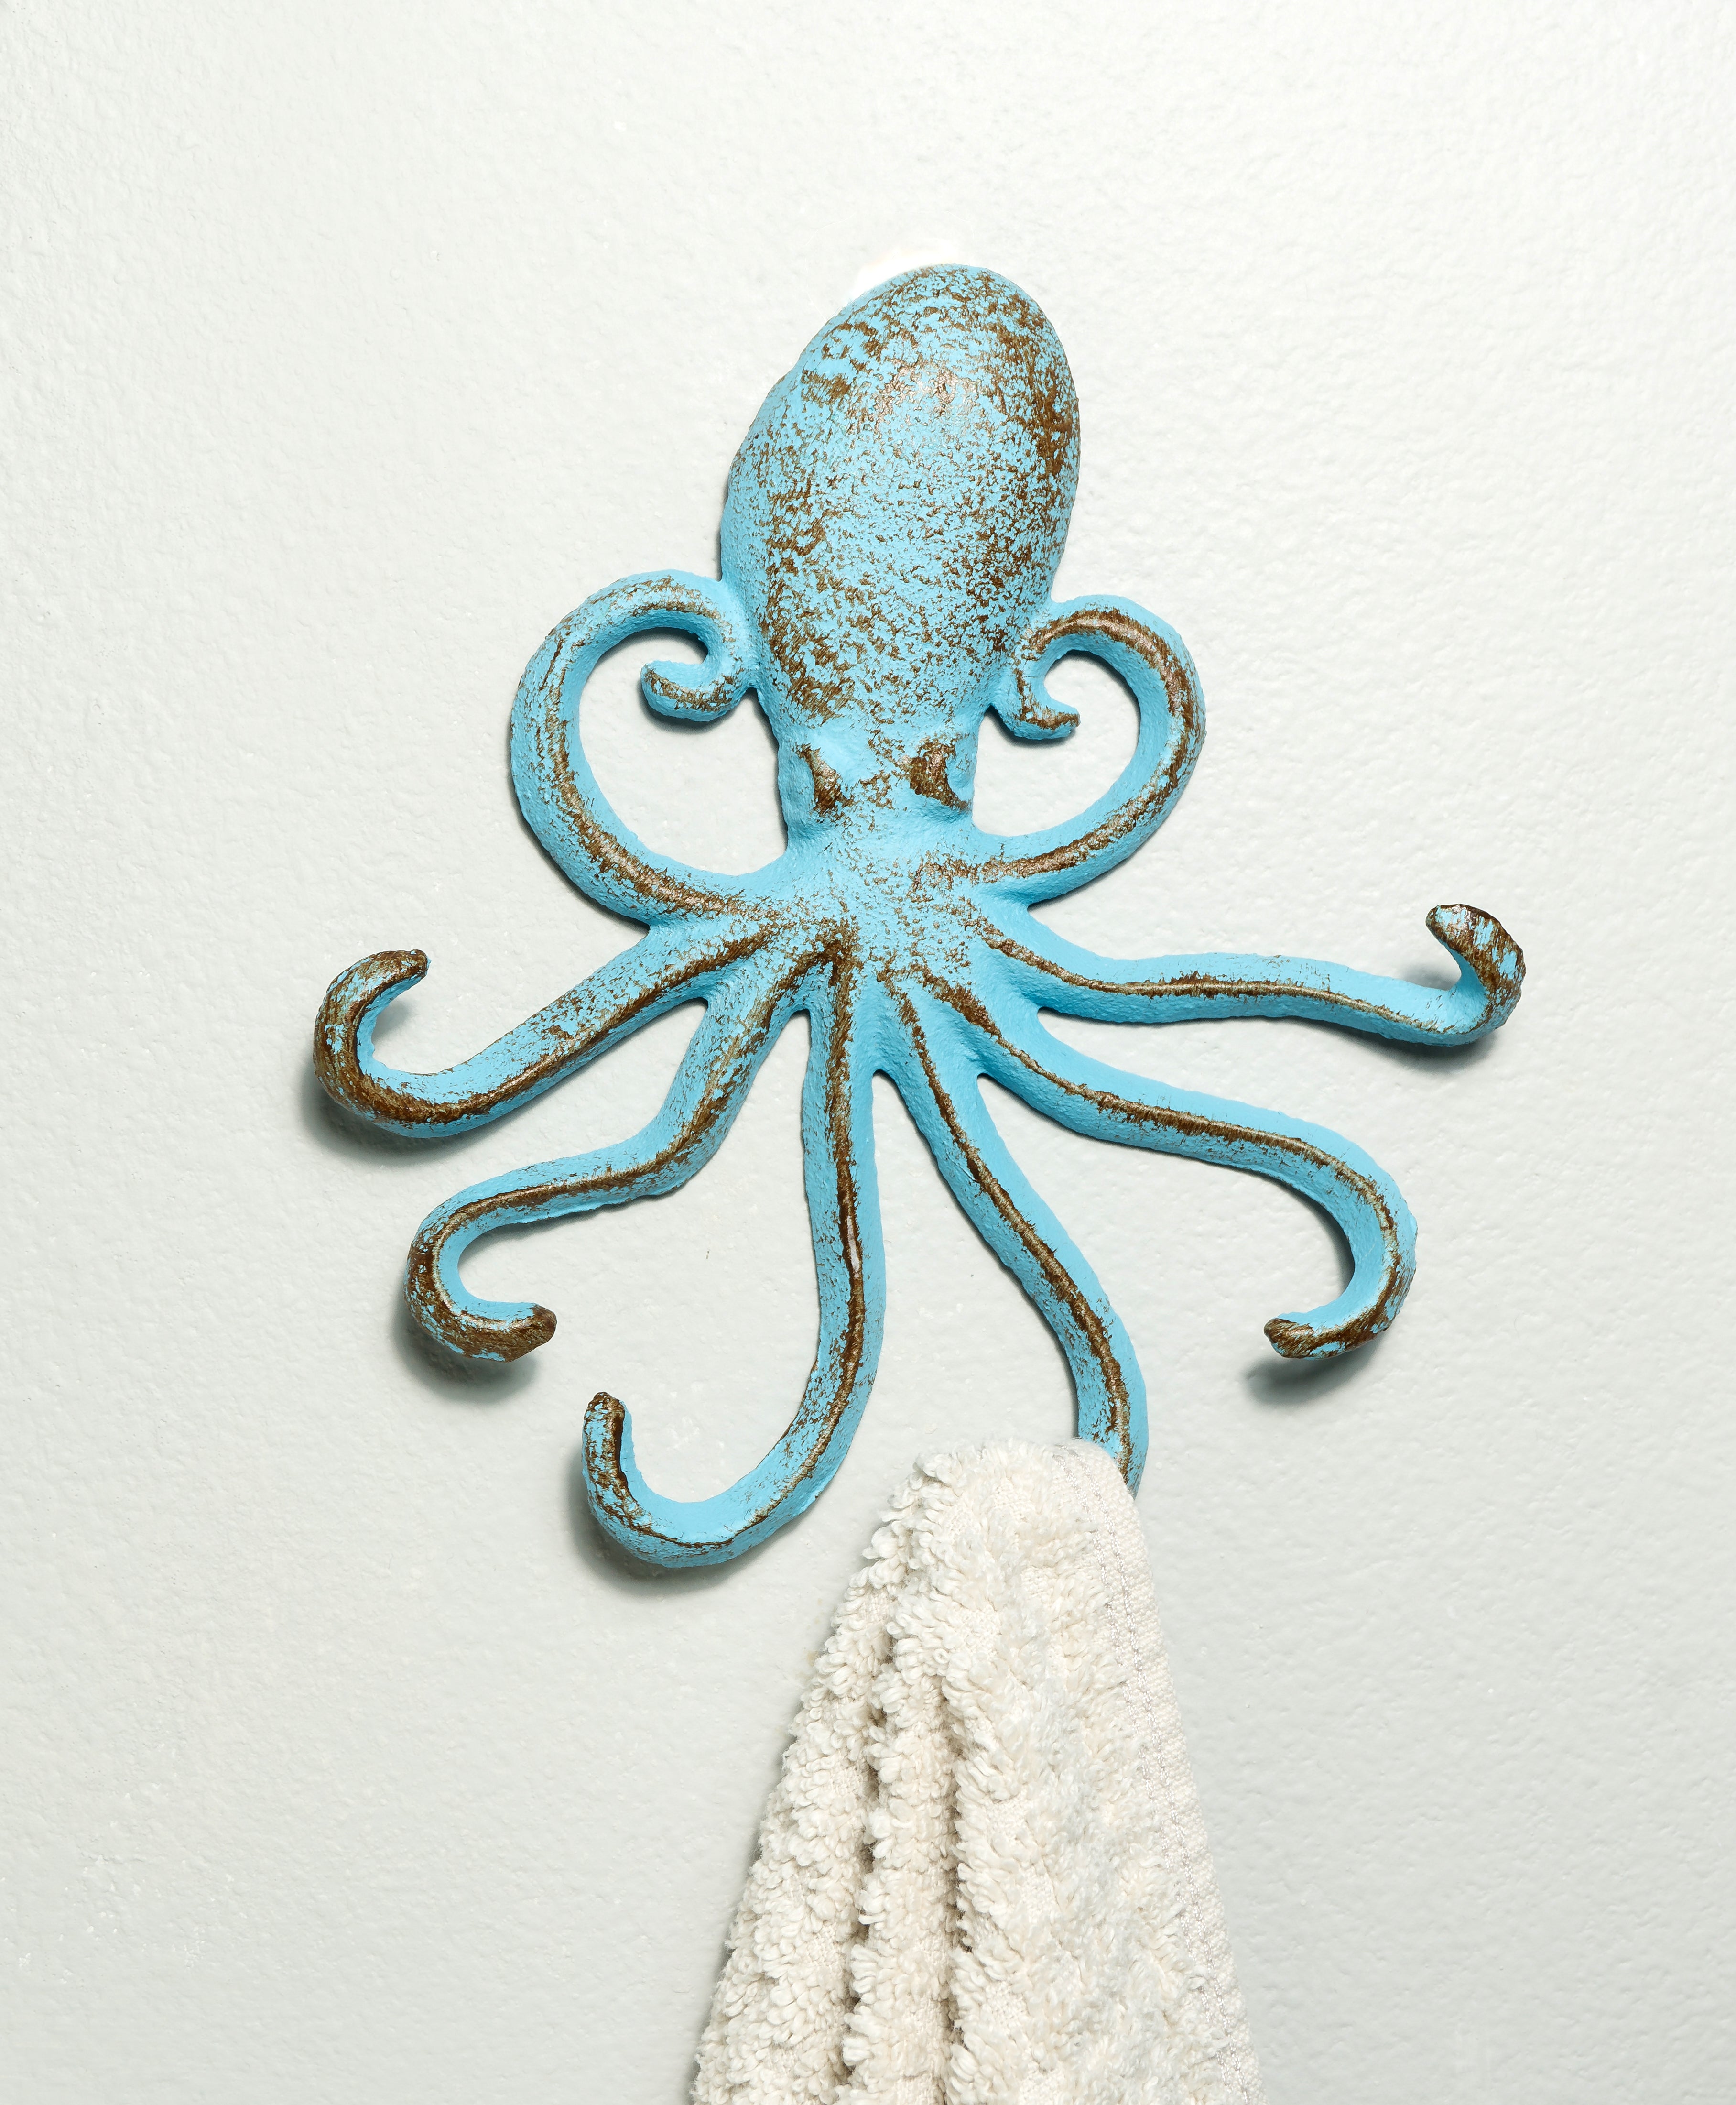  WINTENT Anti Brushed Cast Iron Hanger with 4 Hooks for Hanging  Coat Keys Wall Mount (Octopus-2) : Home & Kitchen